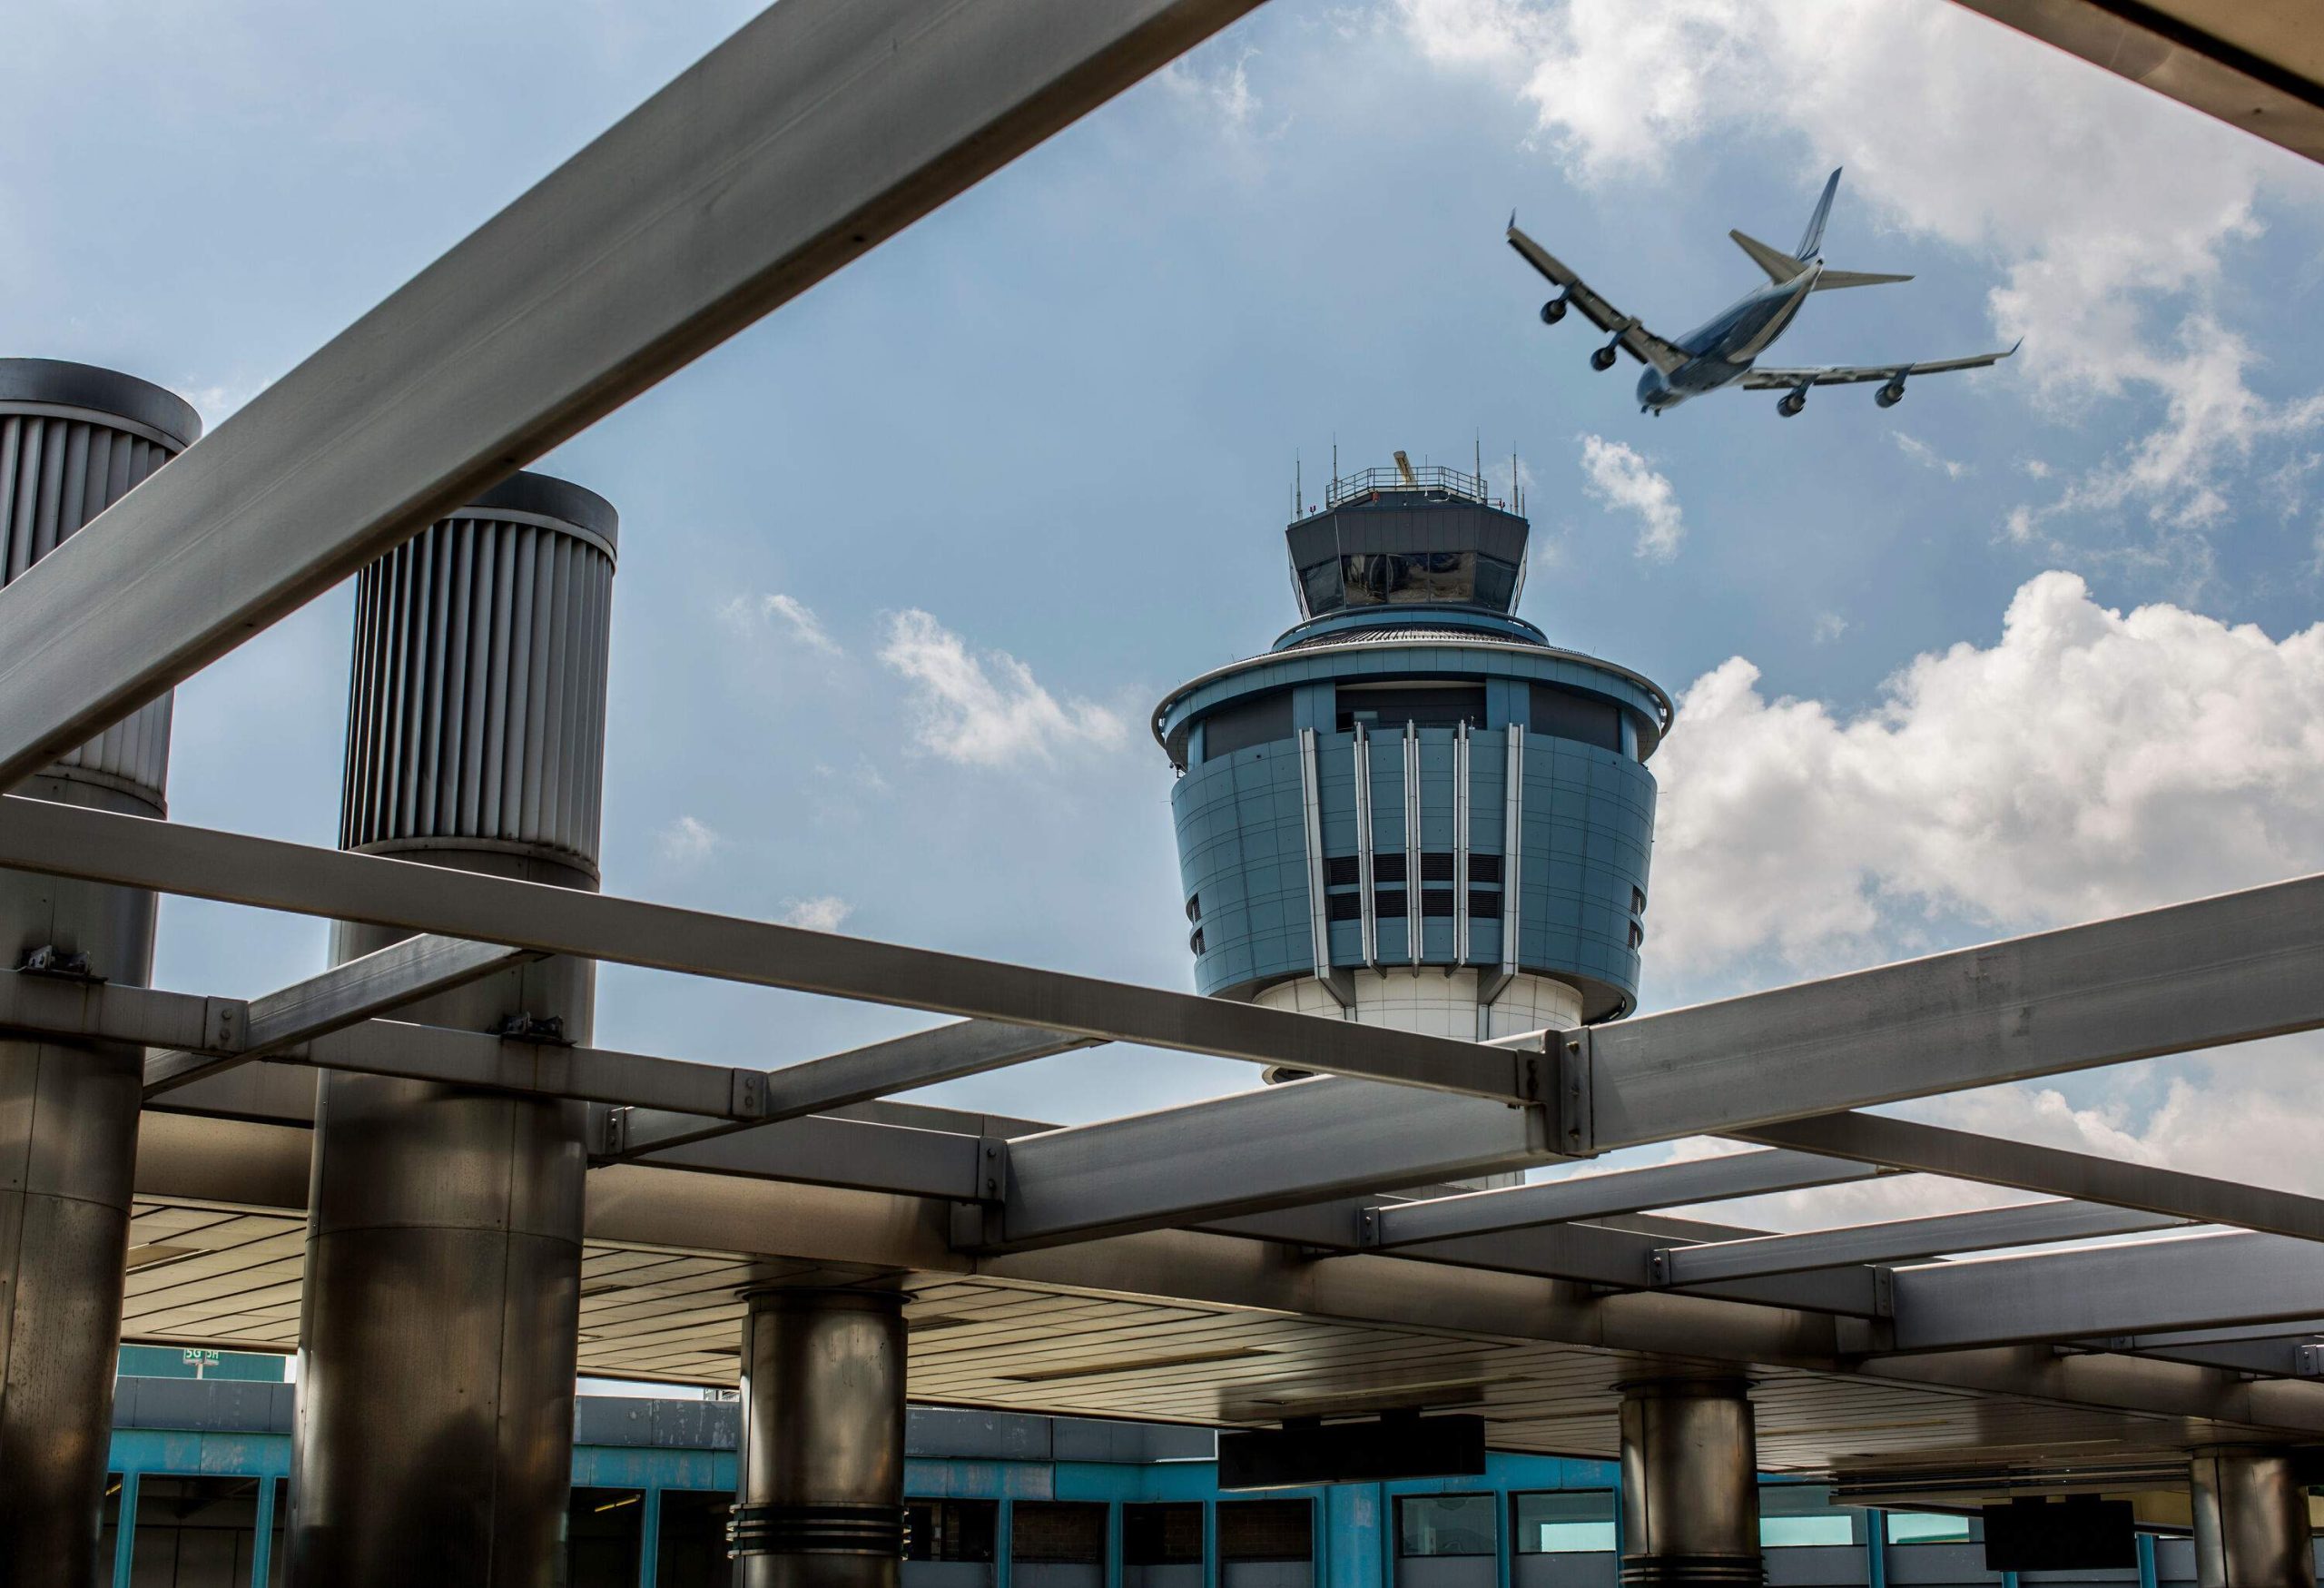 An airplane flying over the air traffic control tower at the airport.